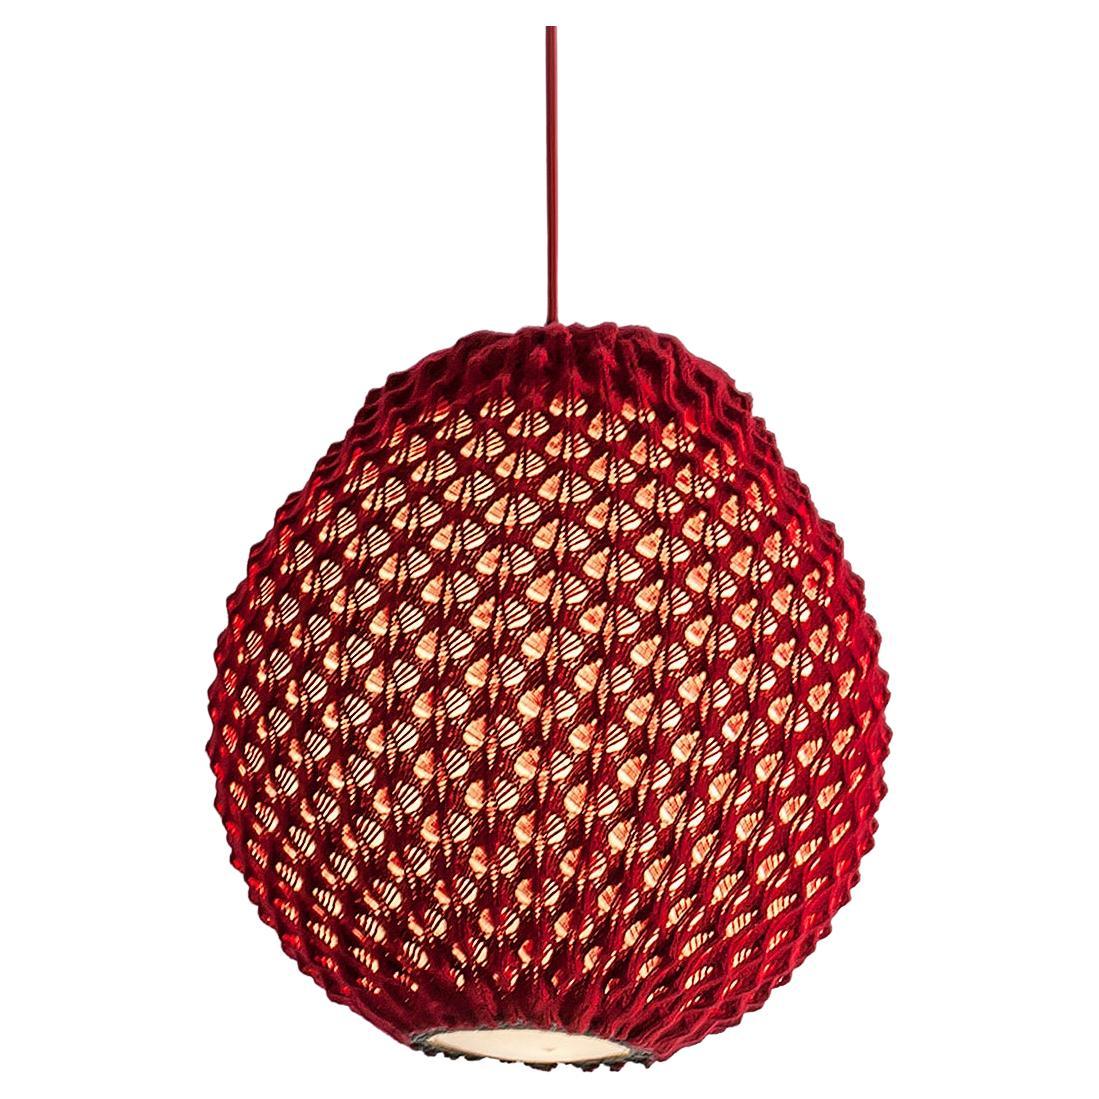 Knitted Lighting Fixture  - Pendant  - Medium size 40cm For Sale